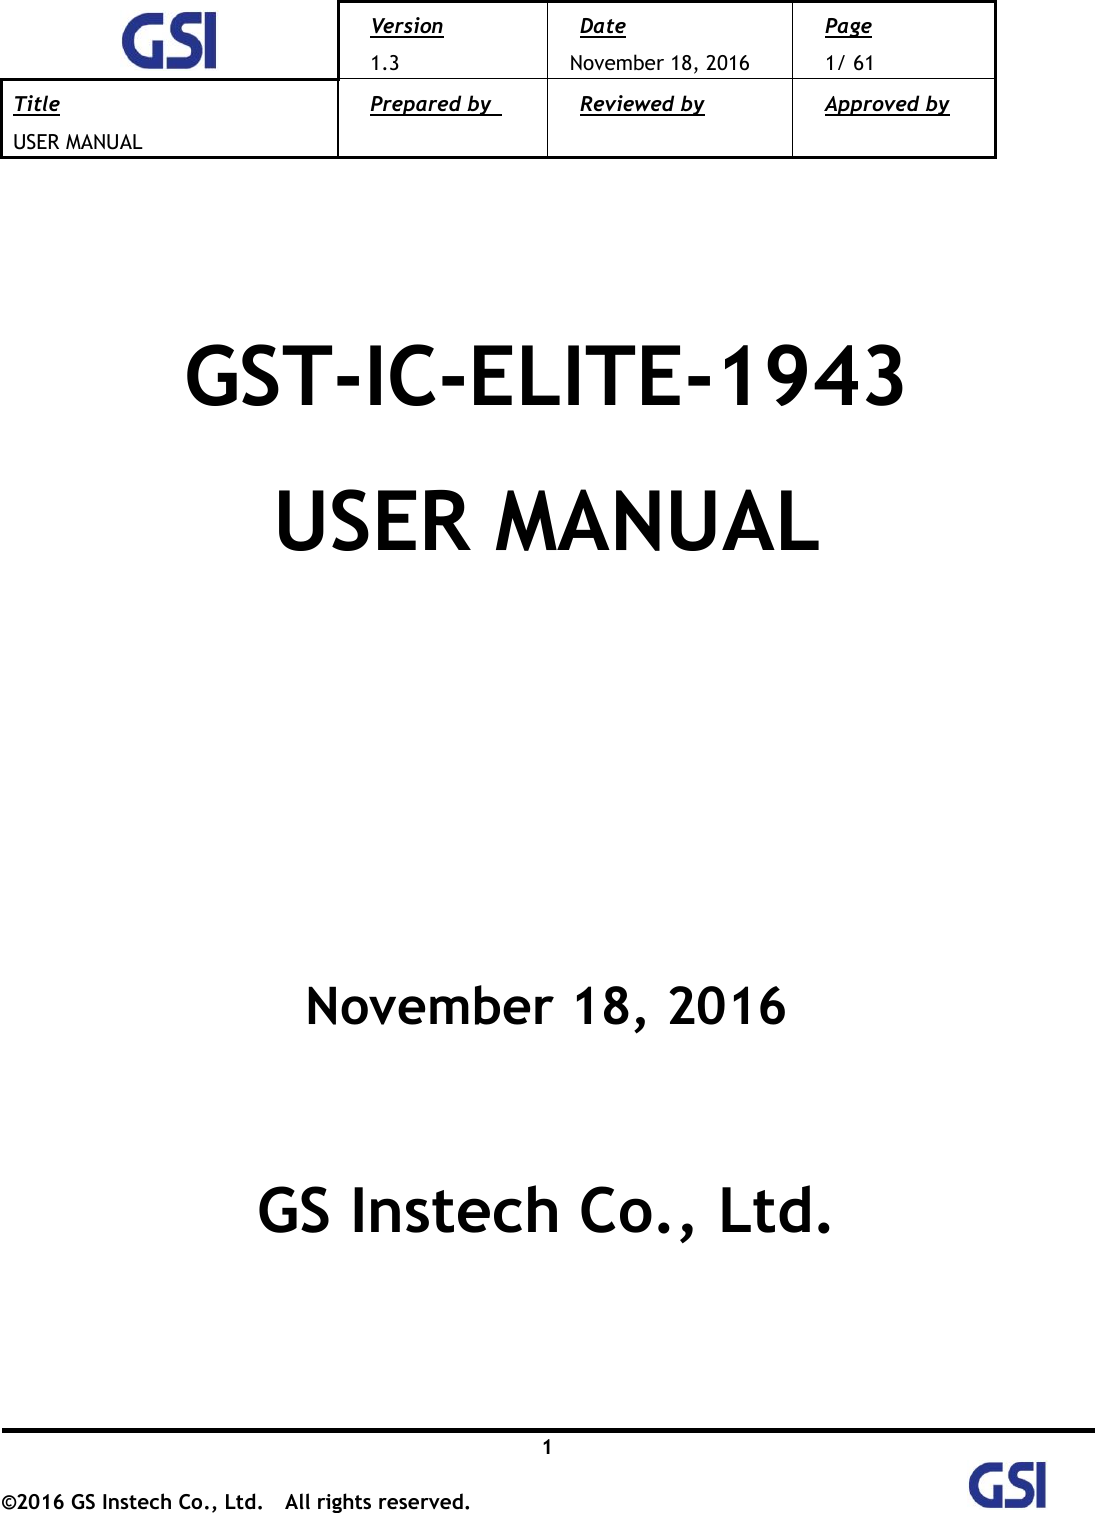  Version 1.3 Date November 18, 2016 Page 1/ 61 Title USER MANUAL Prepared by   Reviewed by  Approved by   1 ©2016 GS Instech Co., Ltd.  All rights reserved.       GST-IC-ELITE-1943 USER MANUAL           November 18, 2016       GS Instech Co., Ltd.     